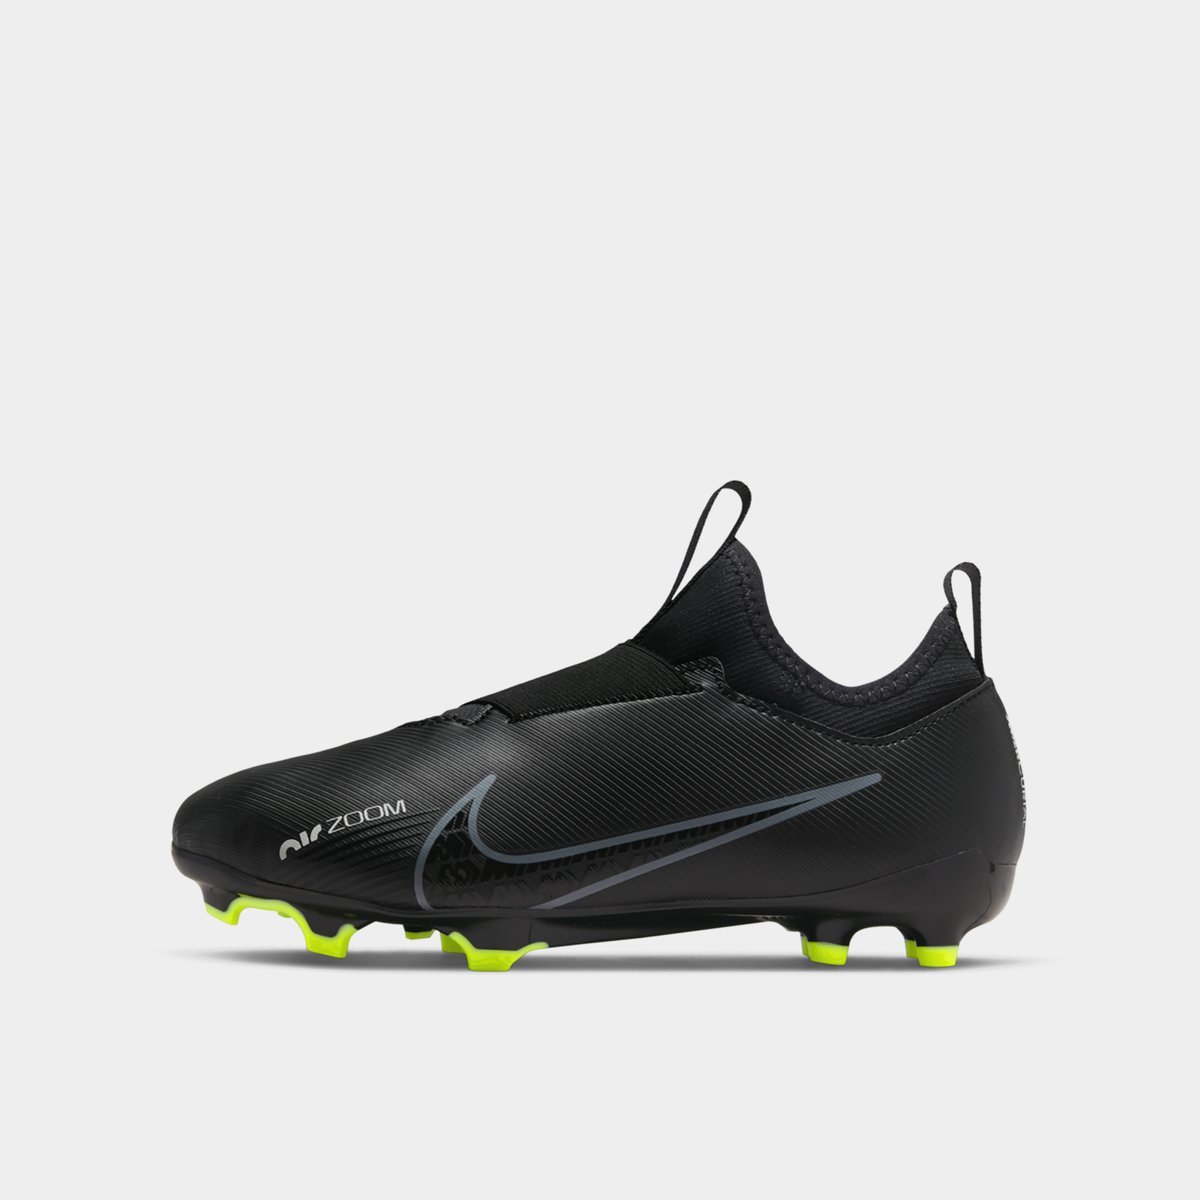 Nike Mercurial X CR7 Astro boot (with free shin pad), Sports